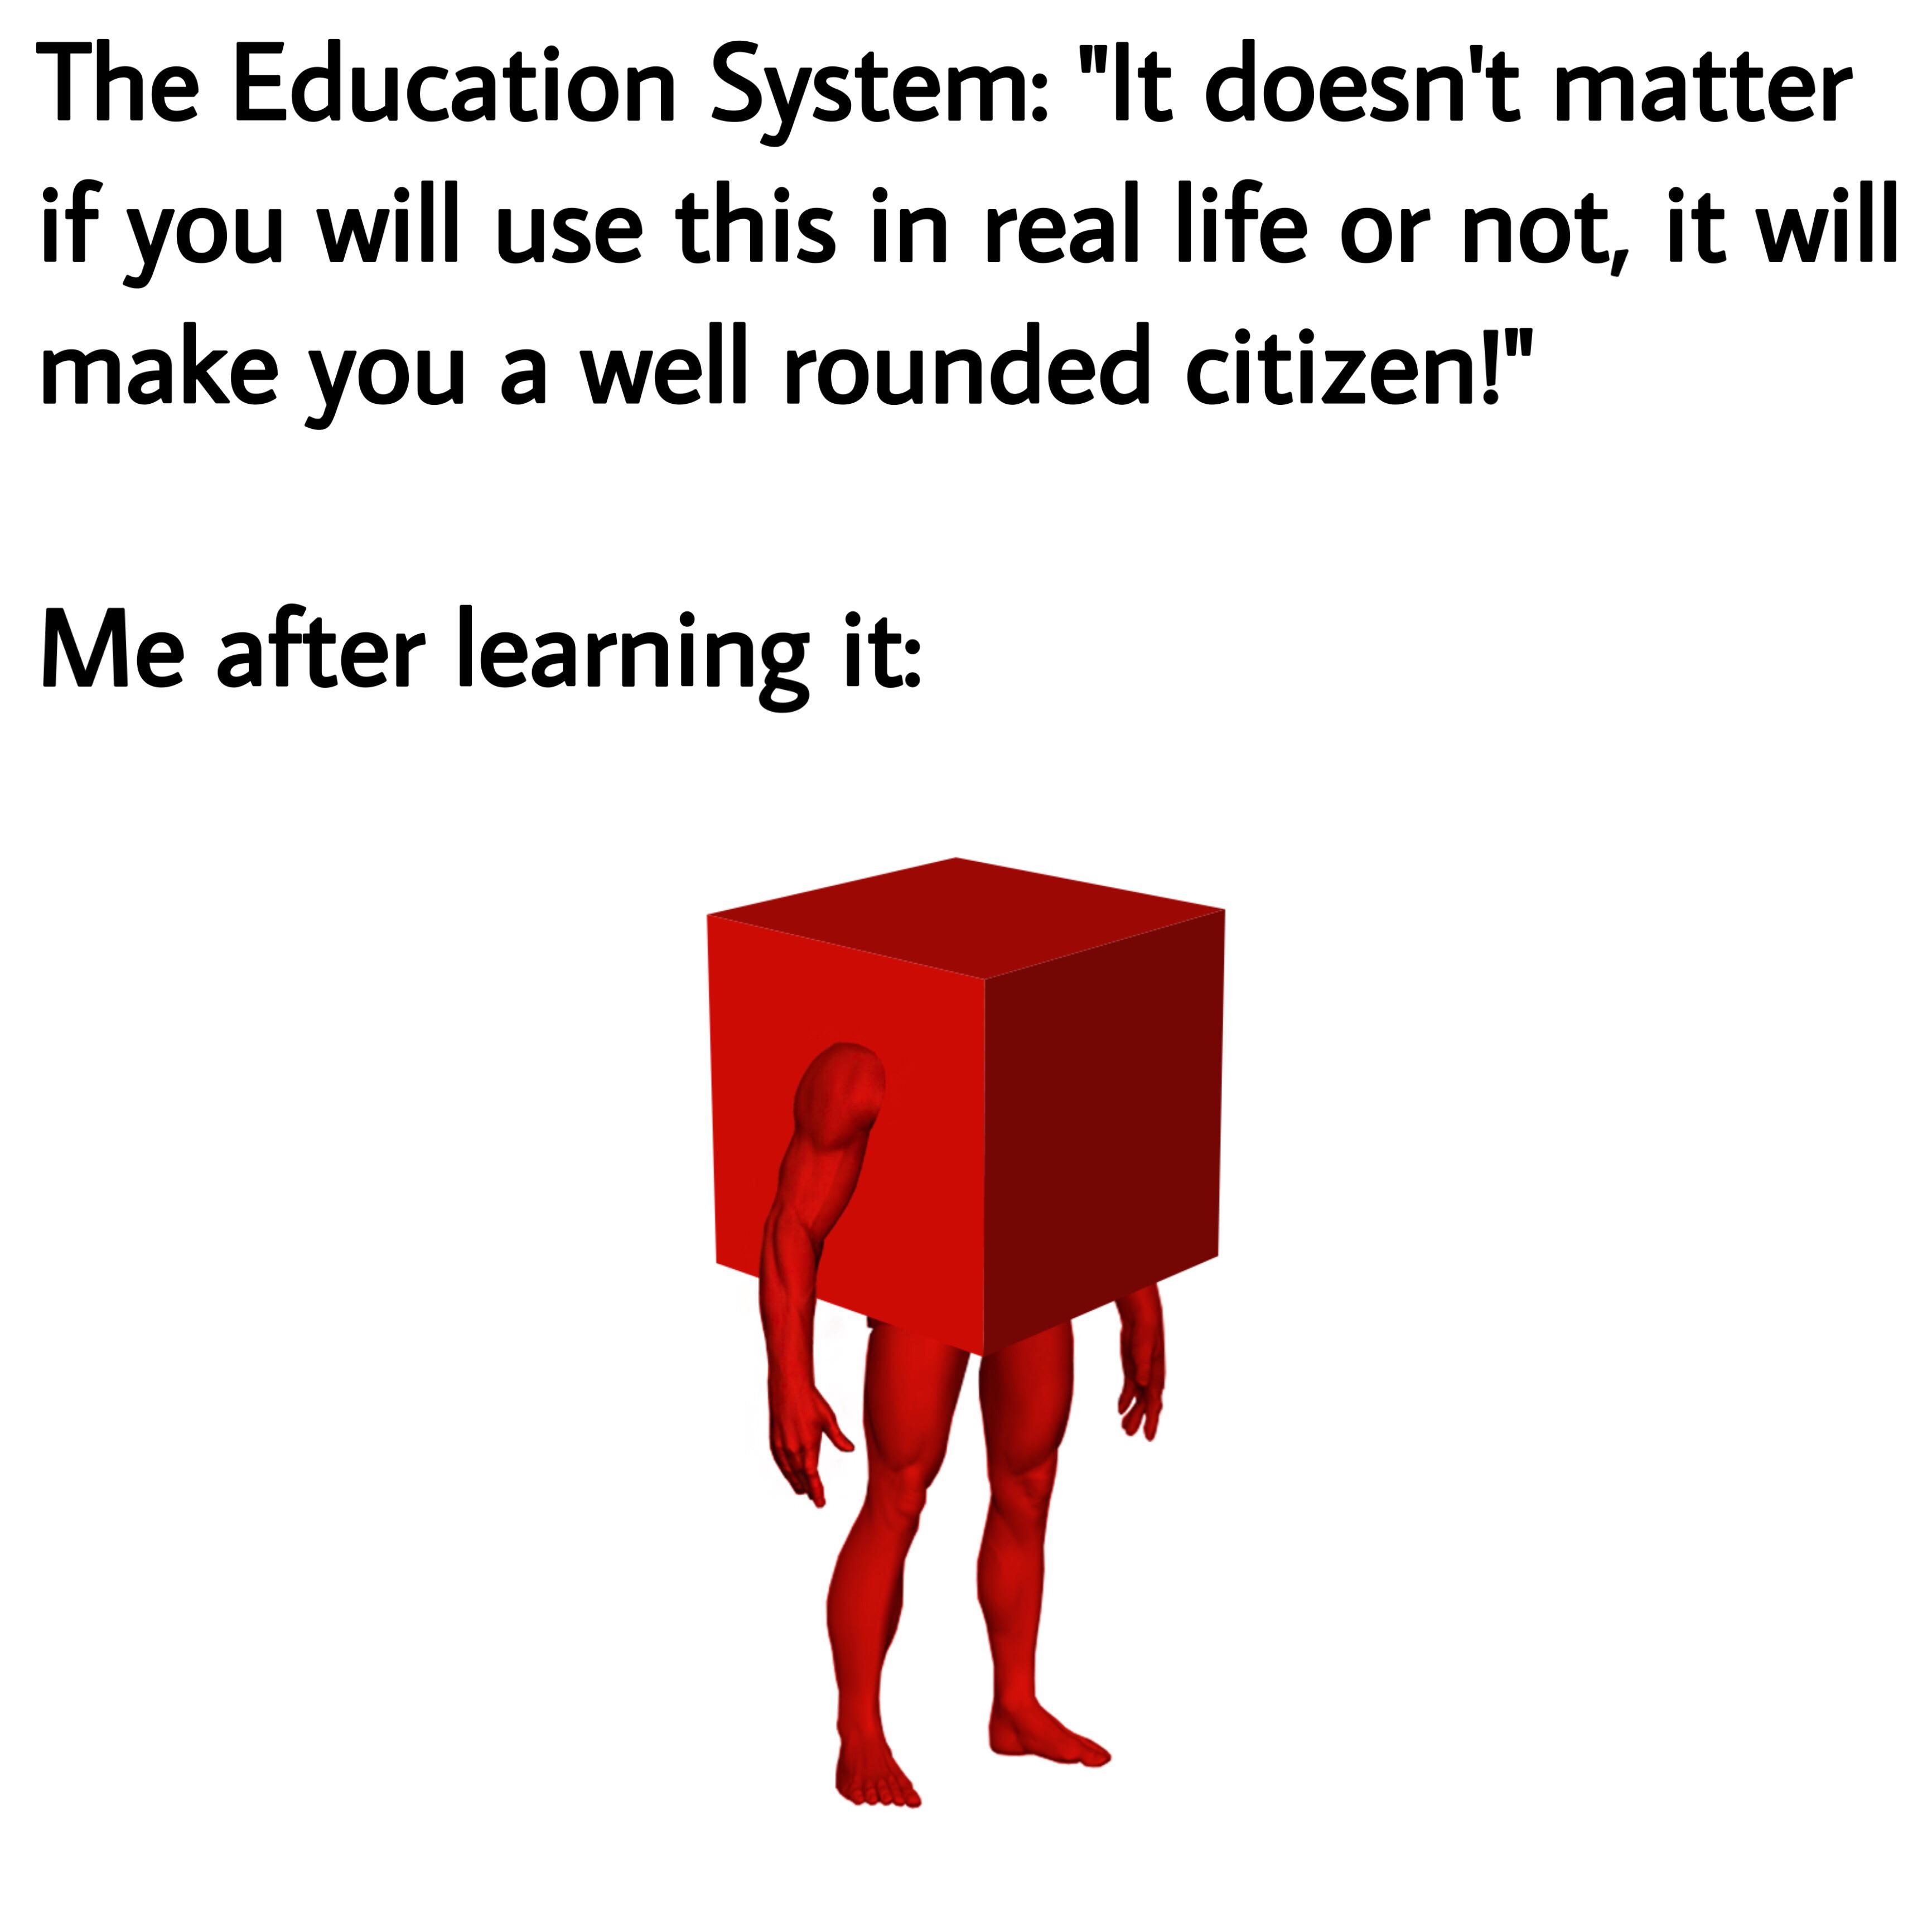 college dank memes - surreal memes png - The Education System "It doesn't matter if you will use this in real life or not, it will make you a well rounded citizen!" Me after learning it